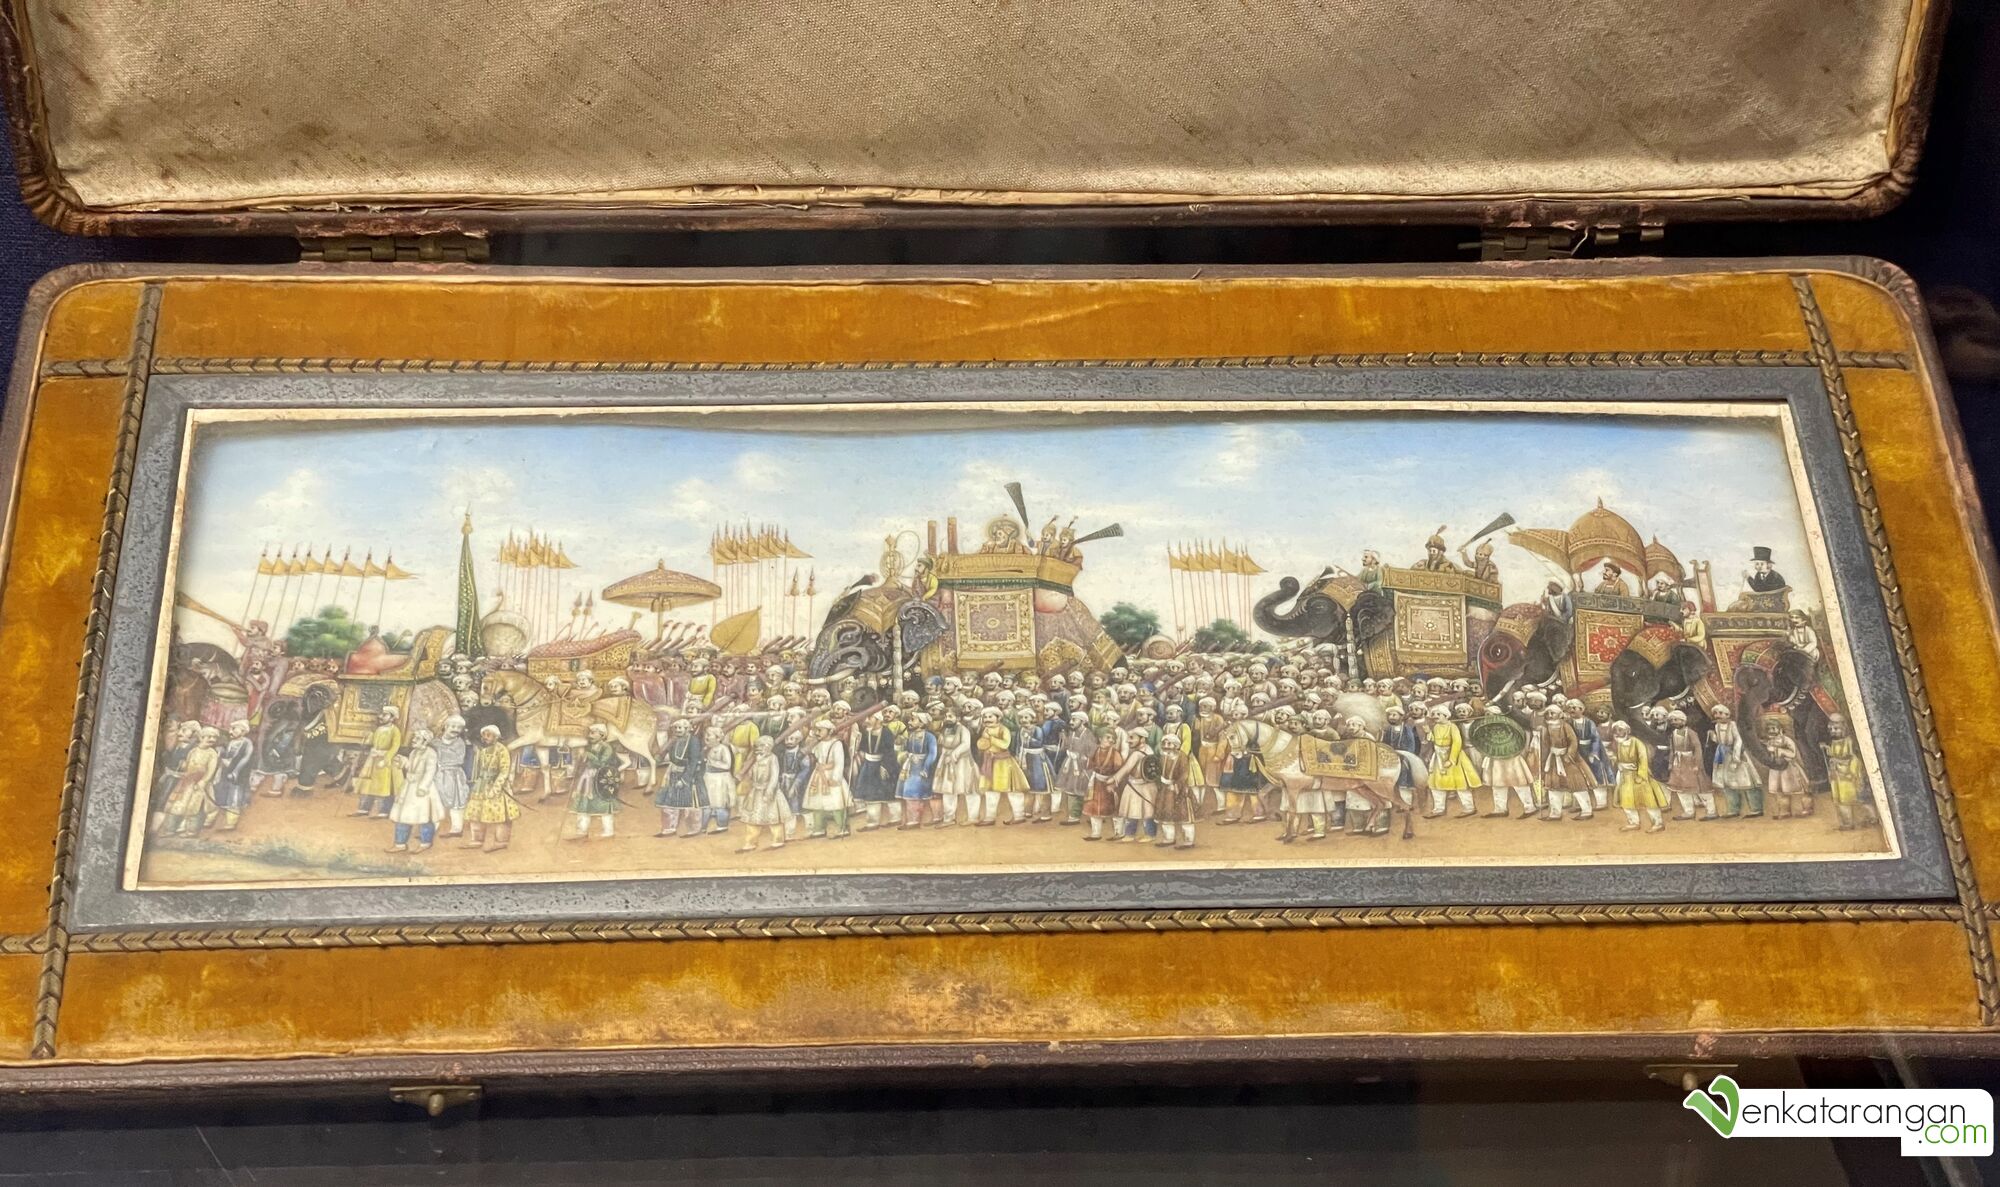 Painting showing the royal parade, each of the face shown here are unique and distinct 